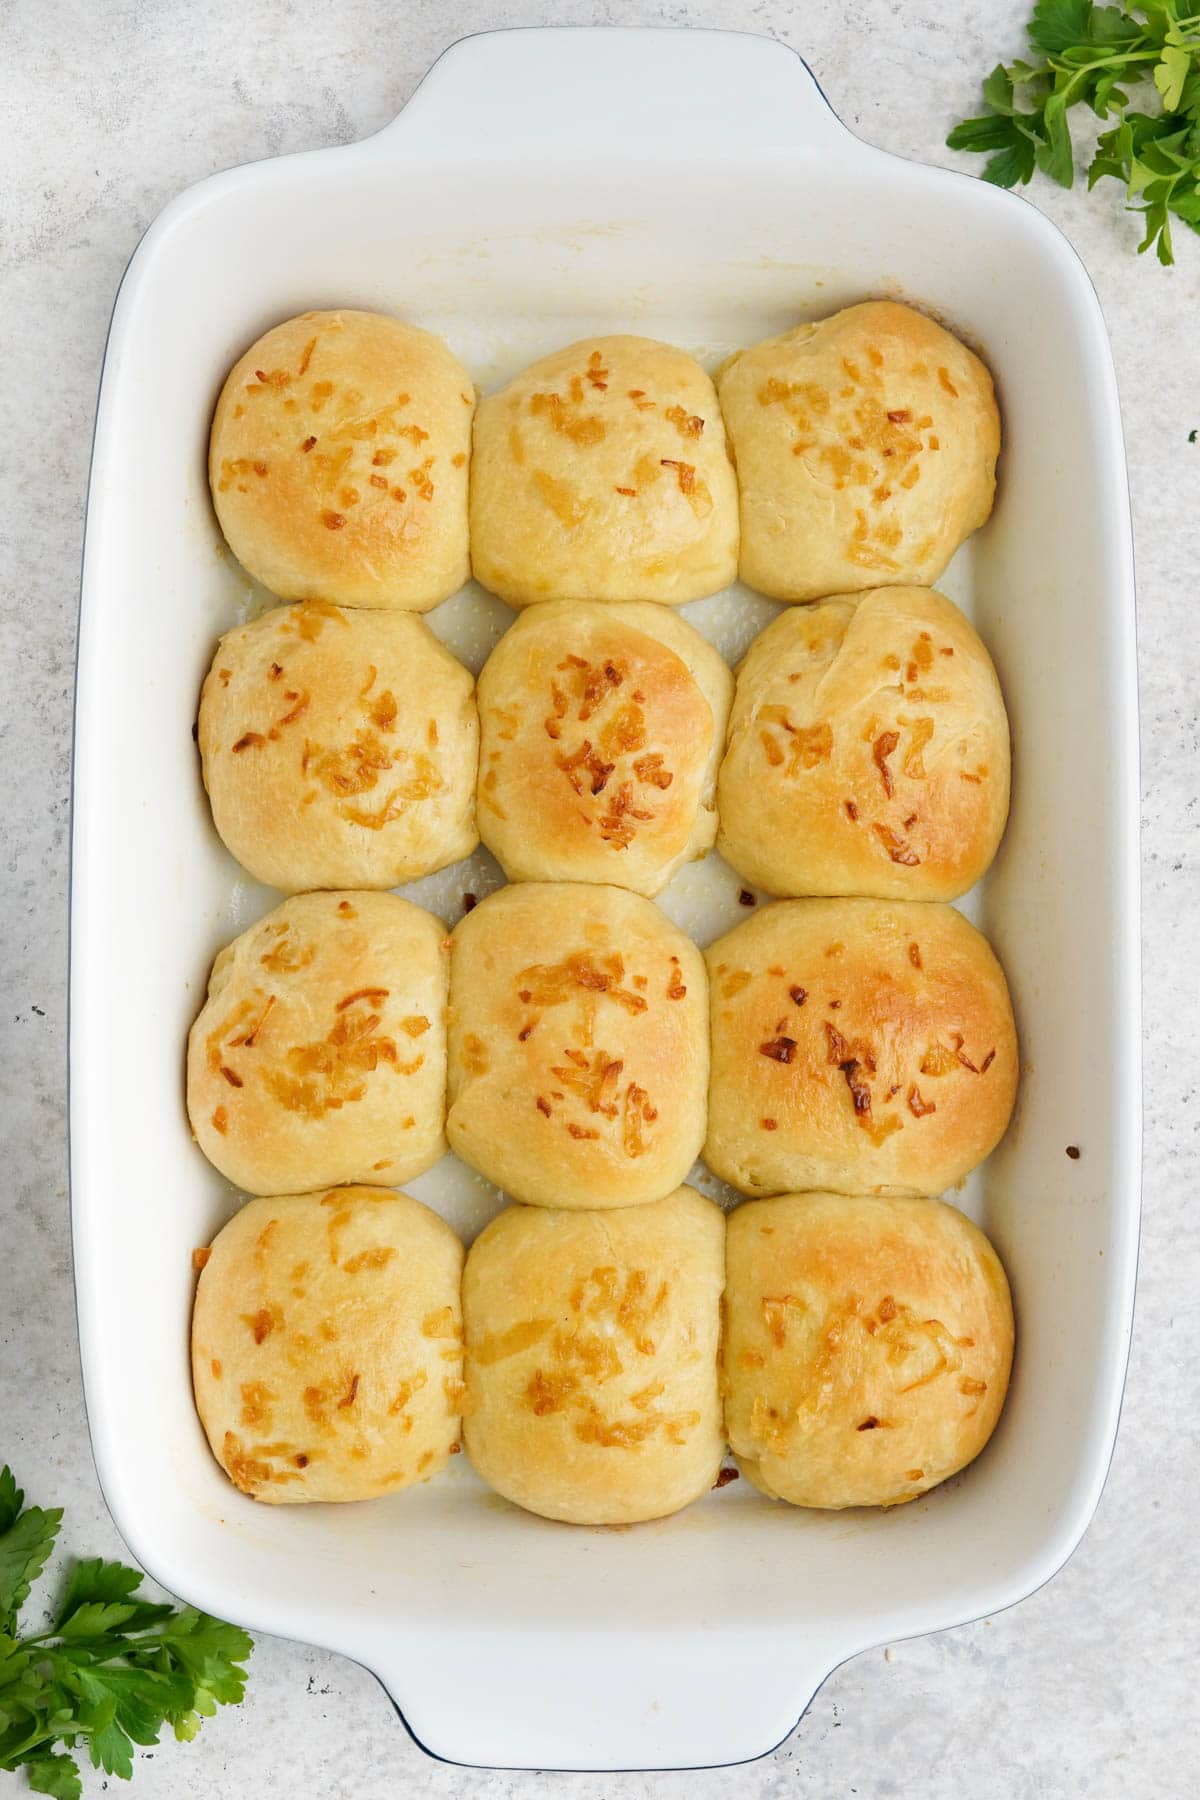 Baked onion rolls in a white baking dish.